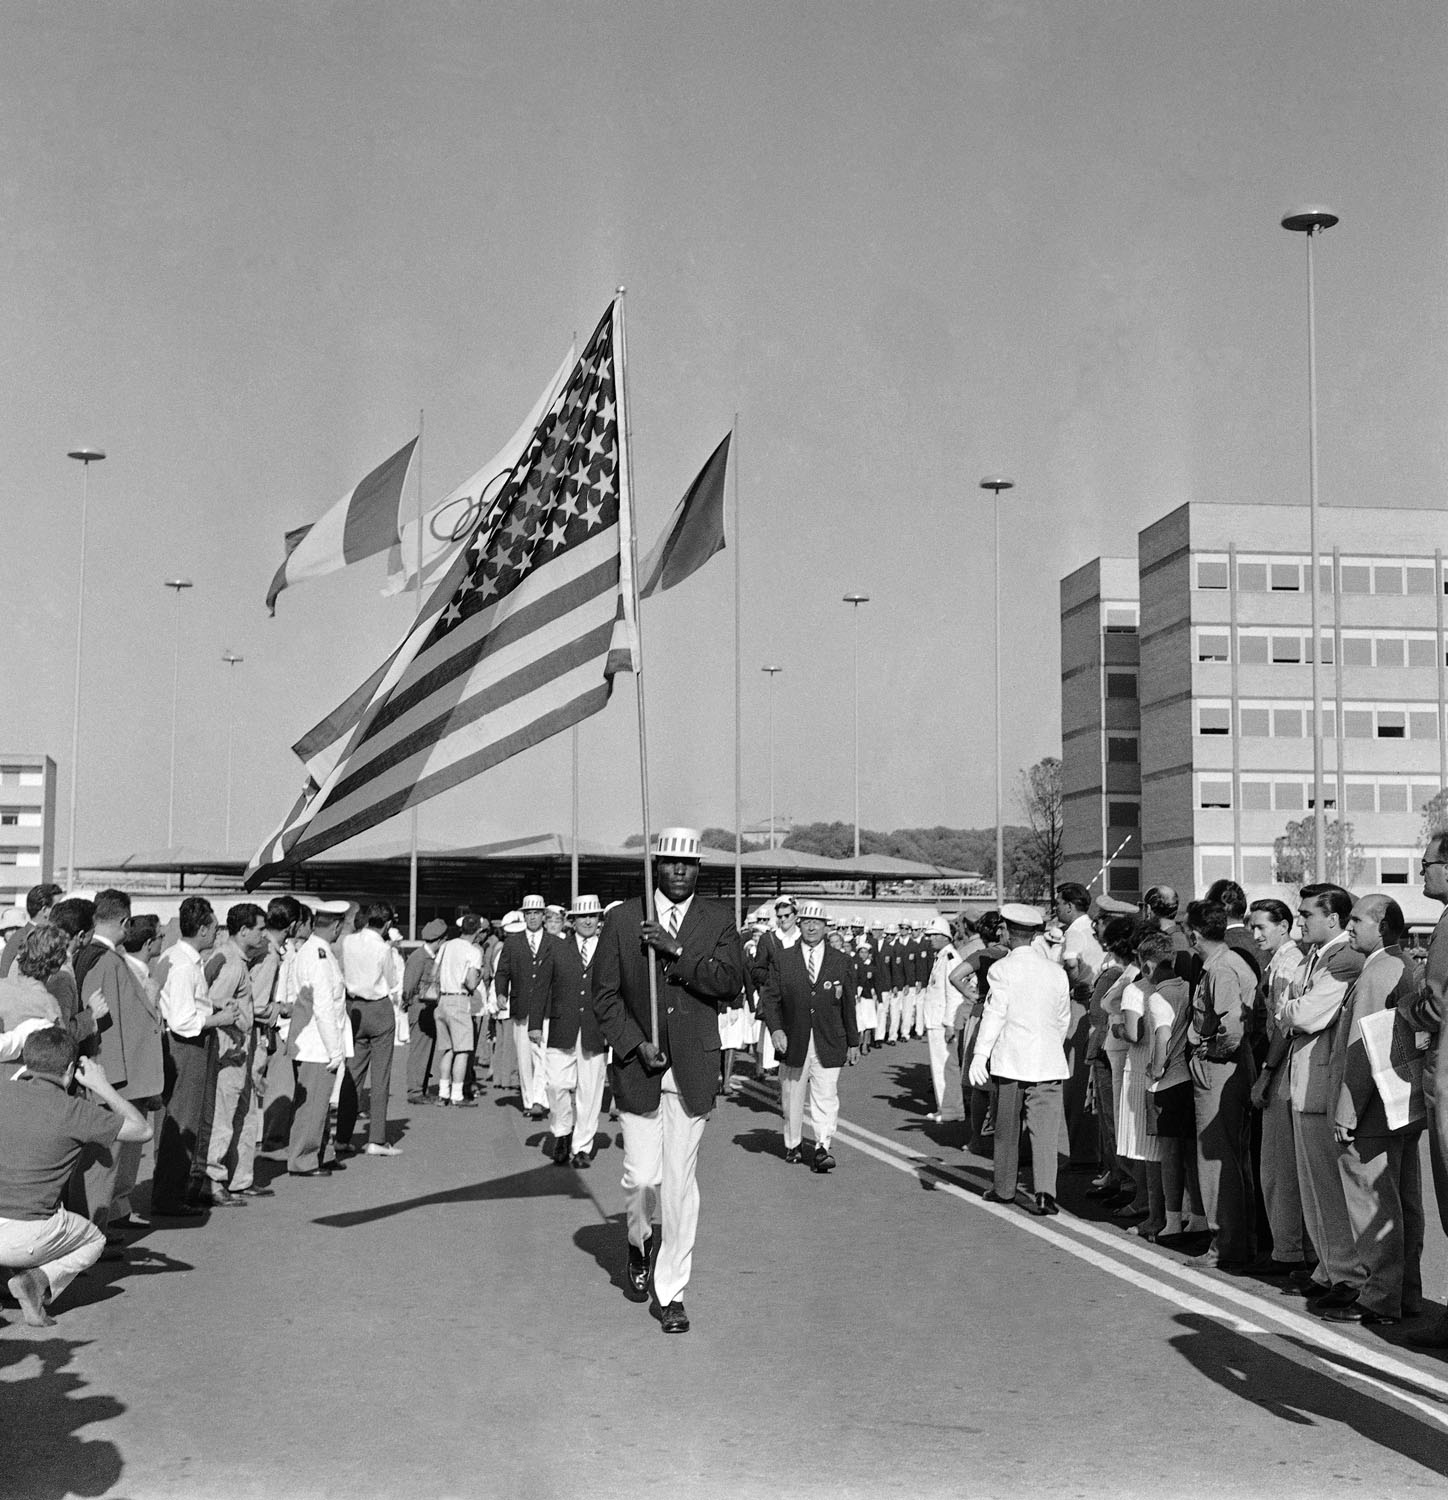 Track and Field athlete Rafer Johnson carries the American flag while leading his team out of the Olympic Village to march in the opening ceremony of the Rome Summer Olympics in 1960.